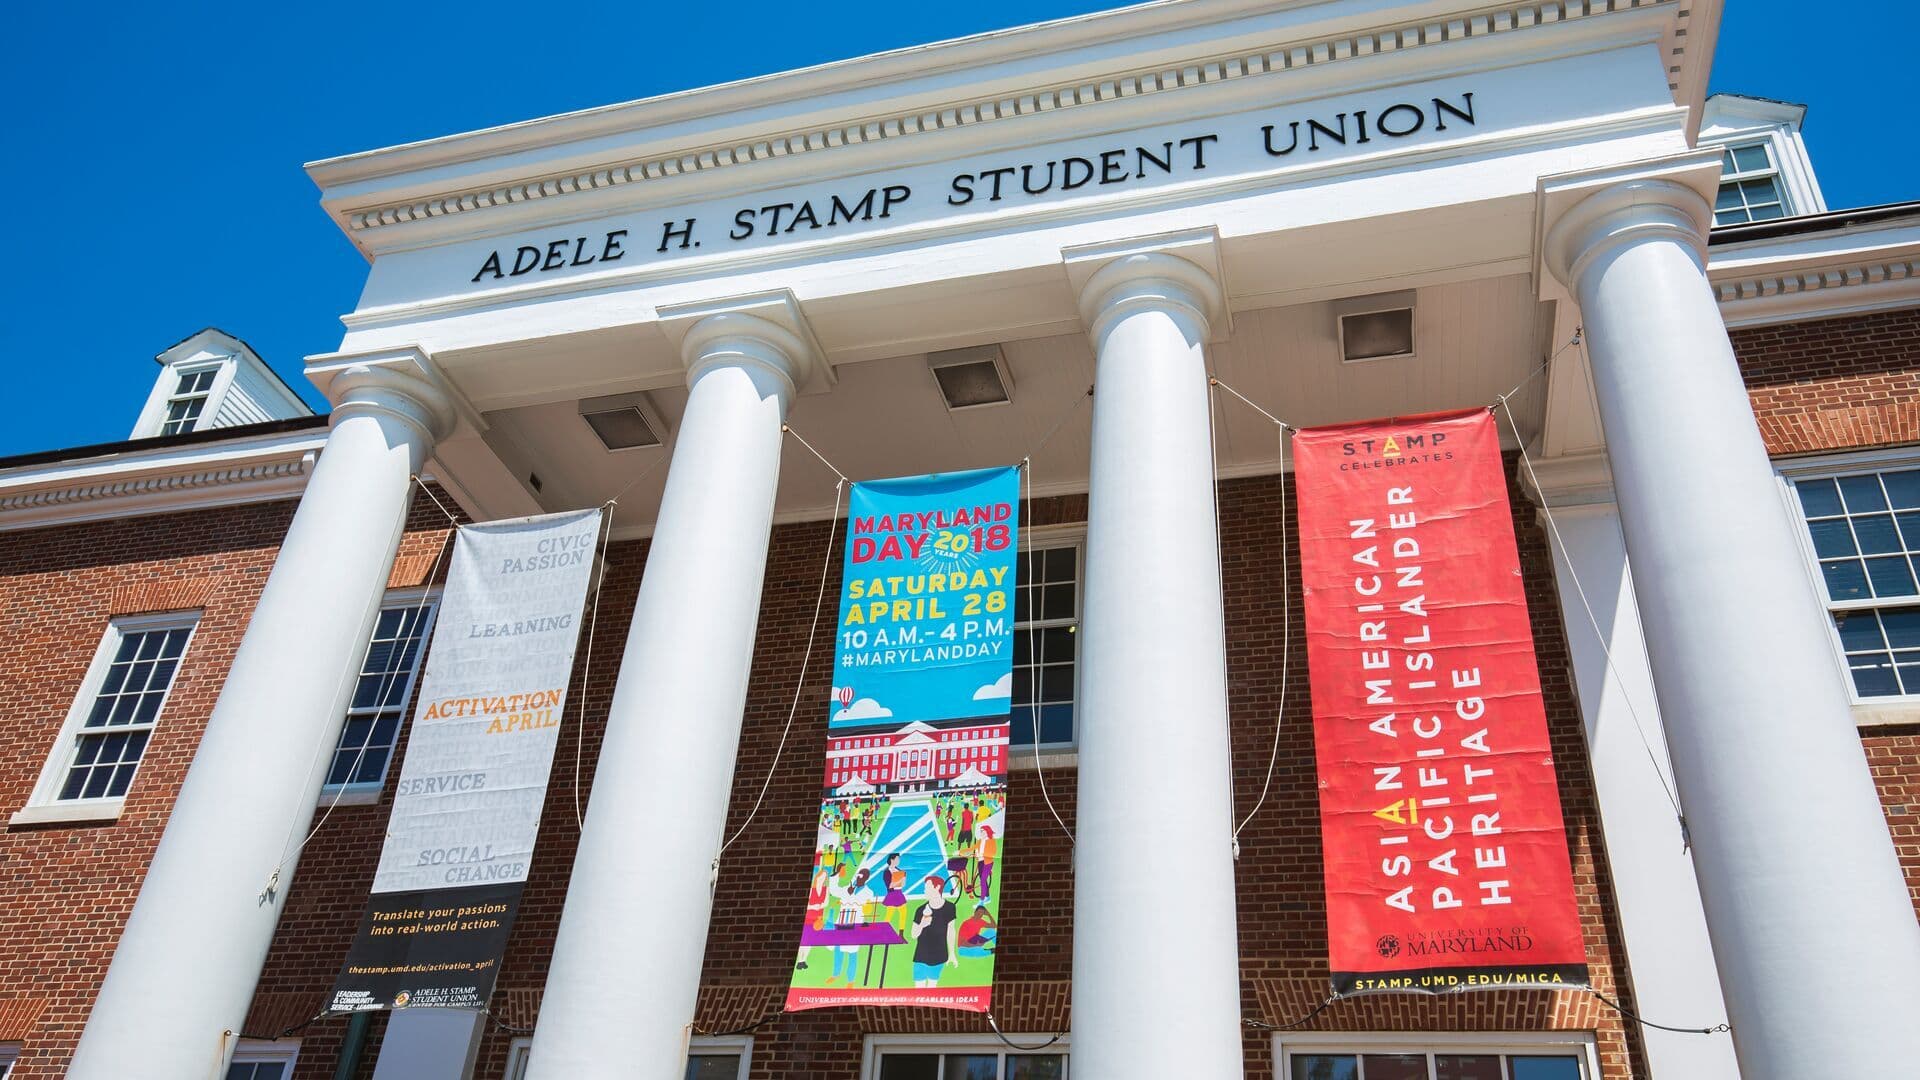 The front entrance to the Stamp Student Union with Maryland Day banners hanging from the columns